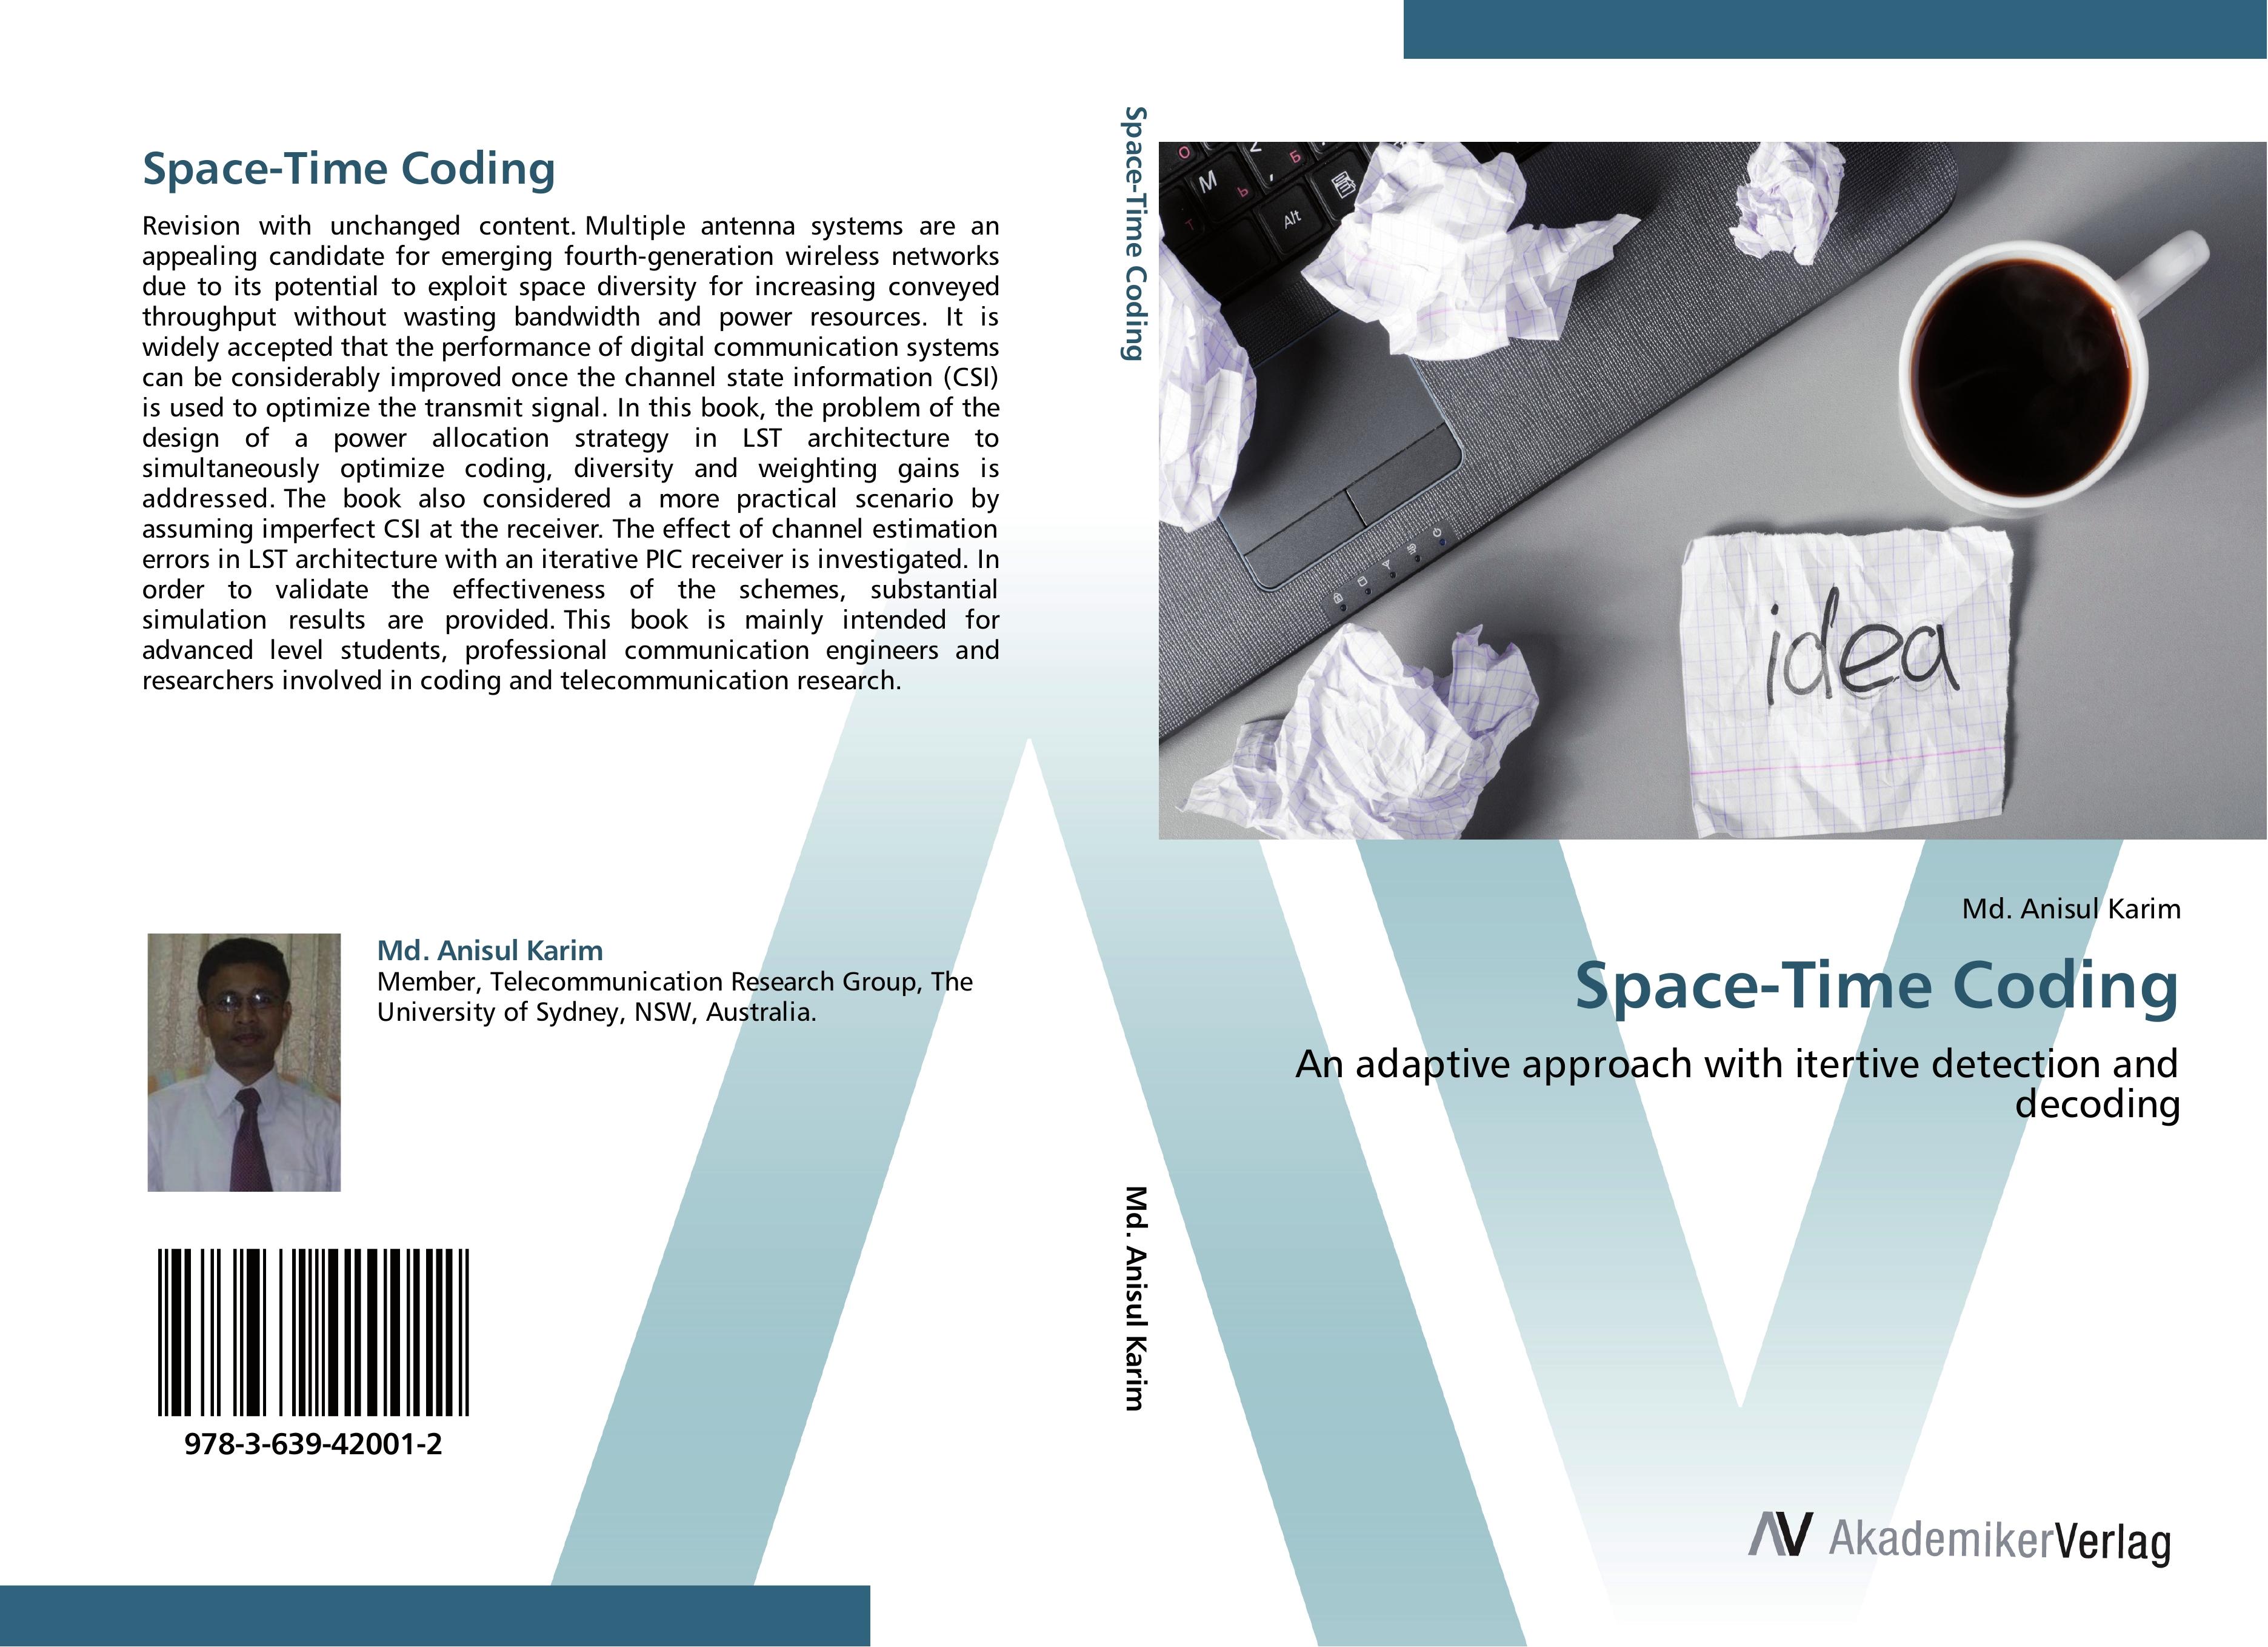 Space-Time Coding / An adaptive approach with itertive detection and decoding / Md. Anisul Karim / Taschenbuch / Paperback / 112 S. / Englisch / 2012 / AV Akademikerverlag / EAN 9783639420012 - Karim, Md. Anisul